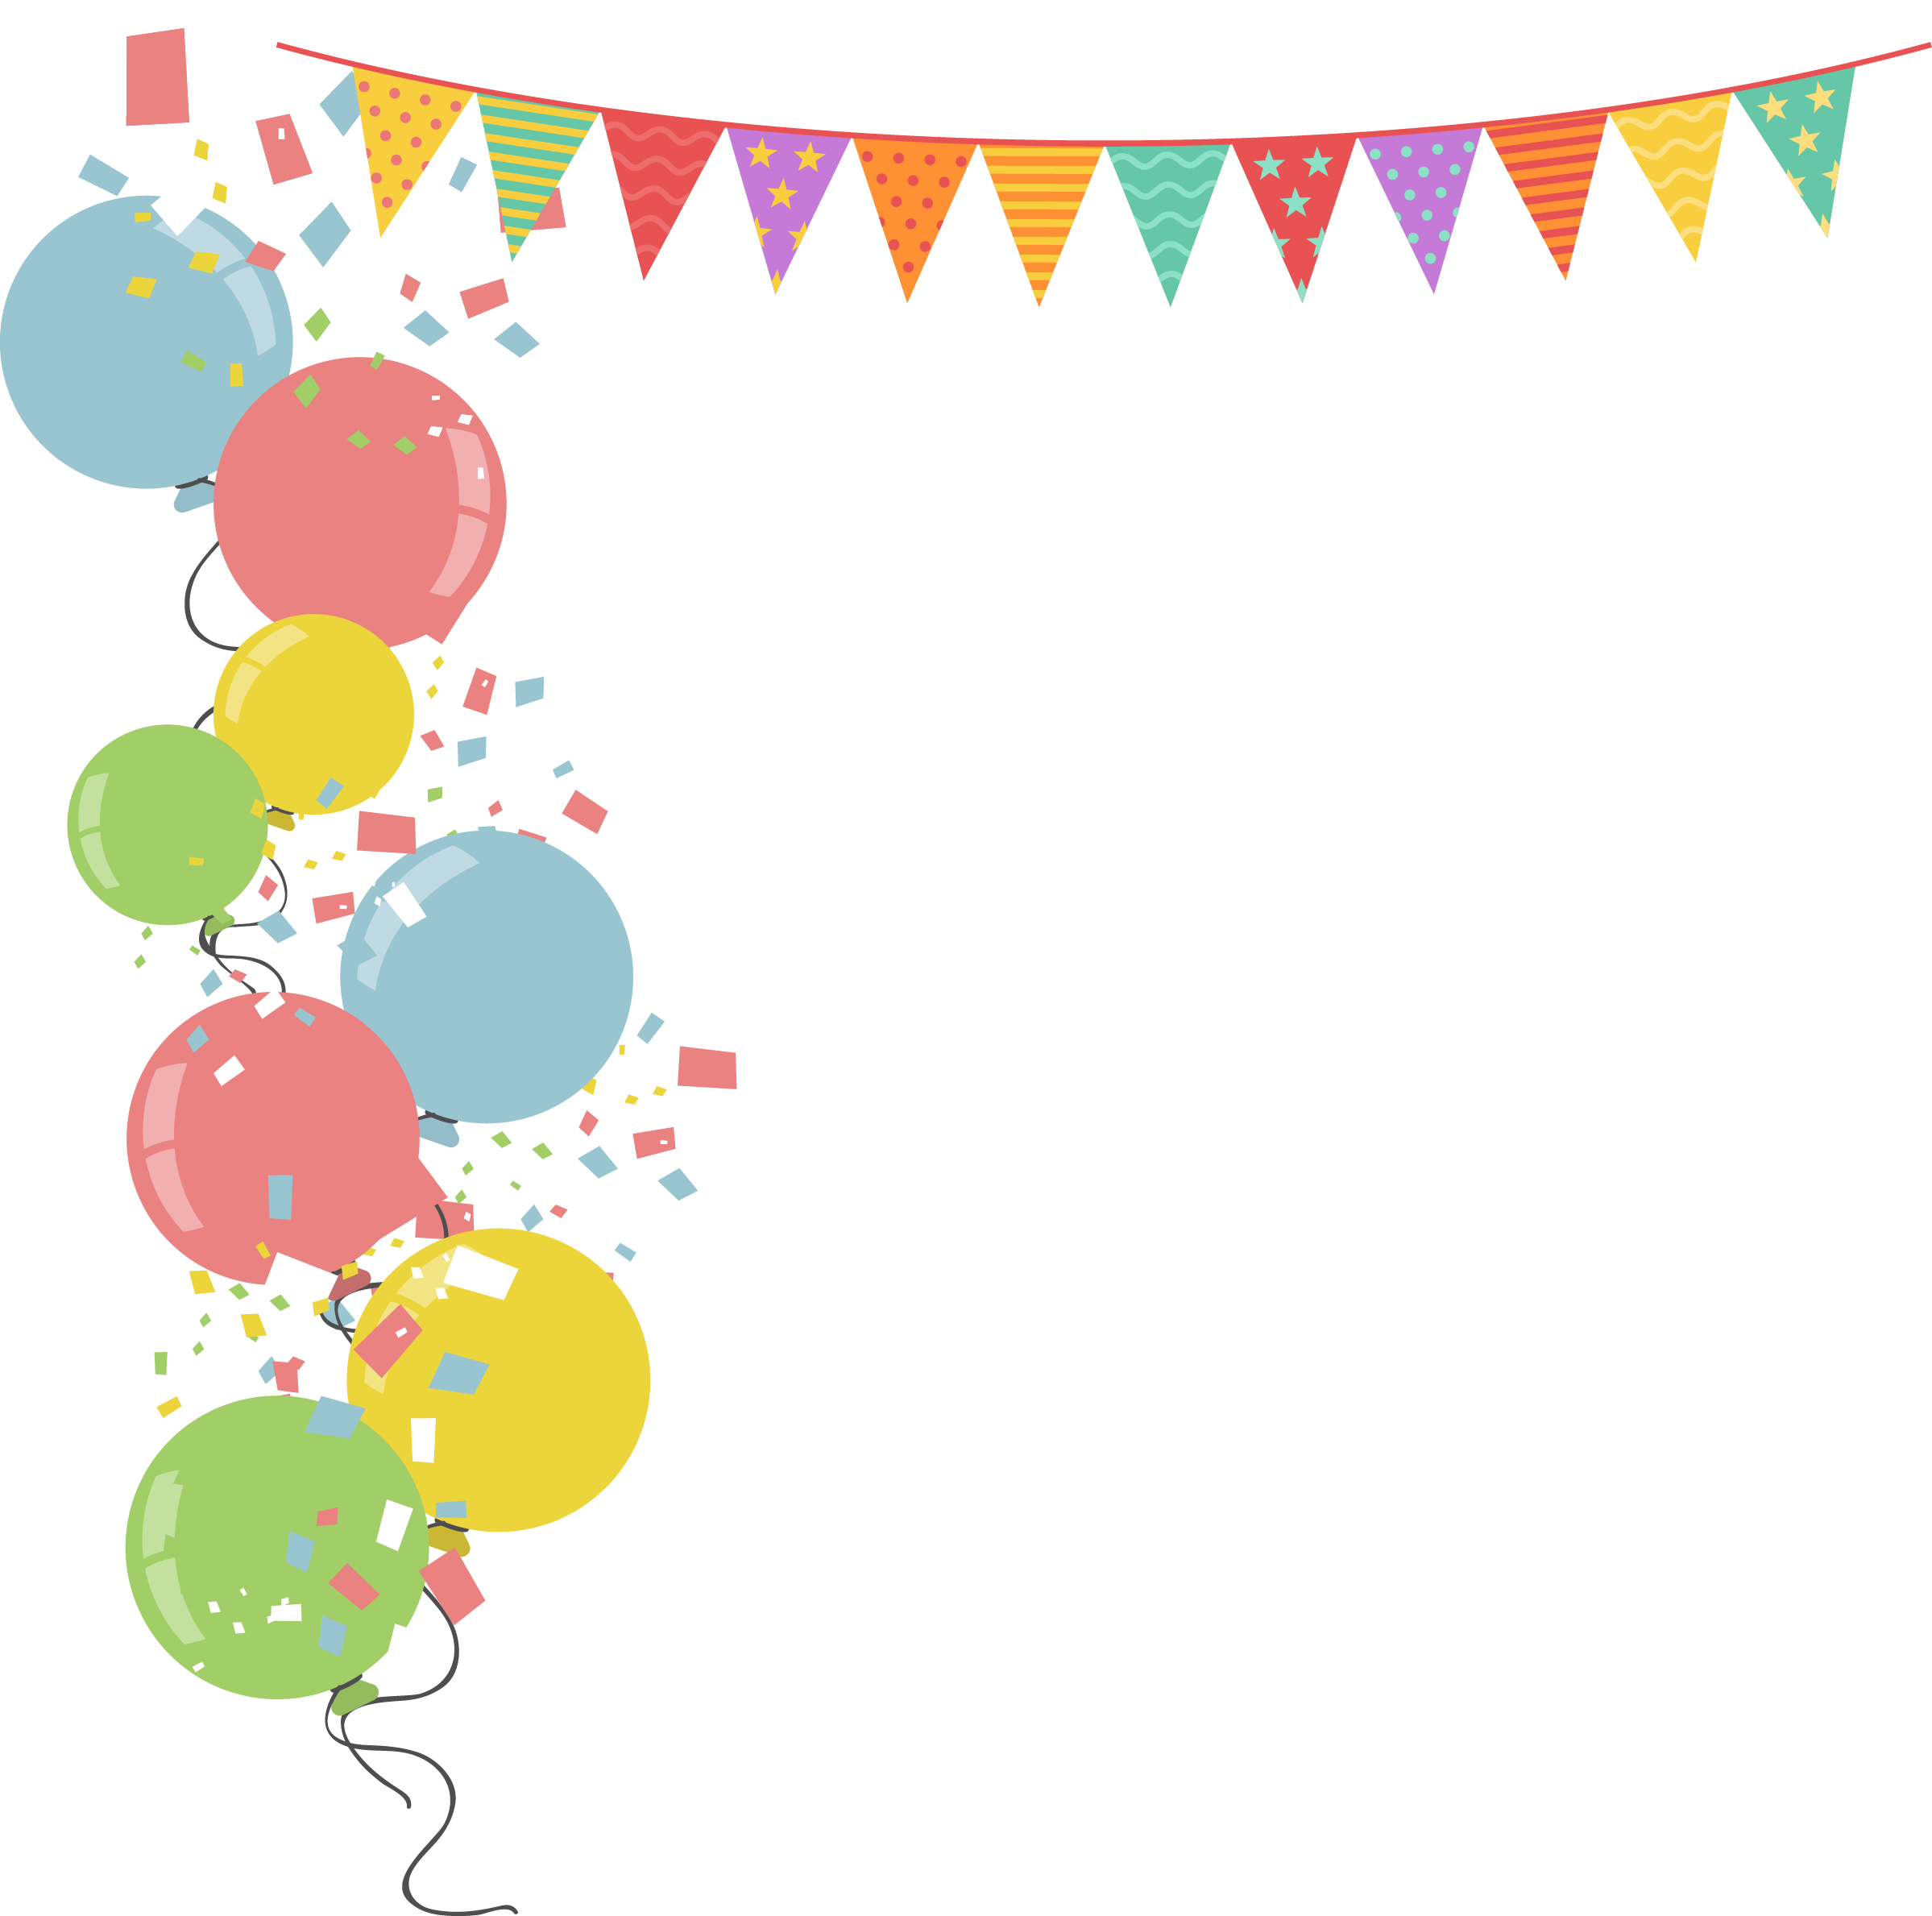 Download Colorful Border Balloon Illustration Vector Flags Party Clipart PN...